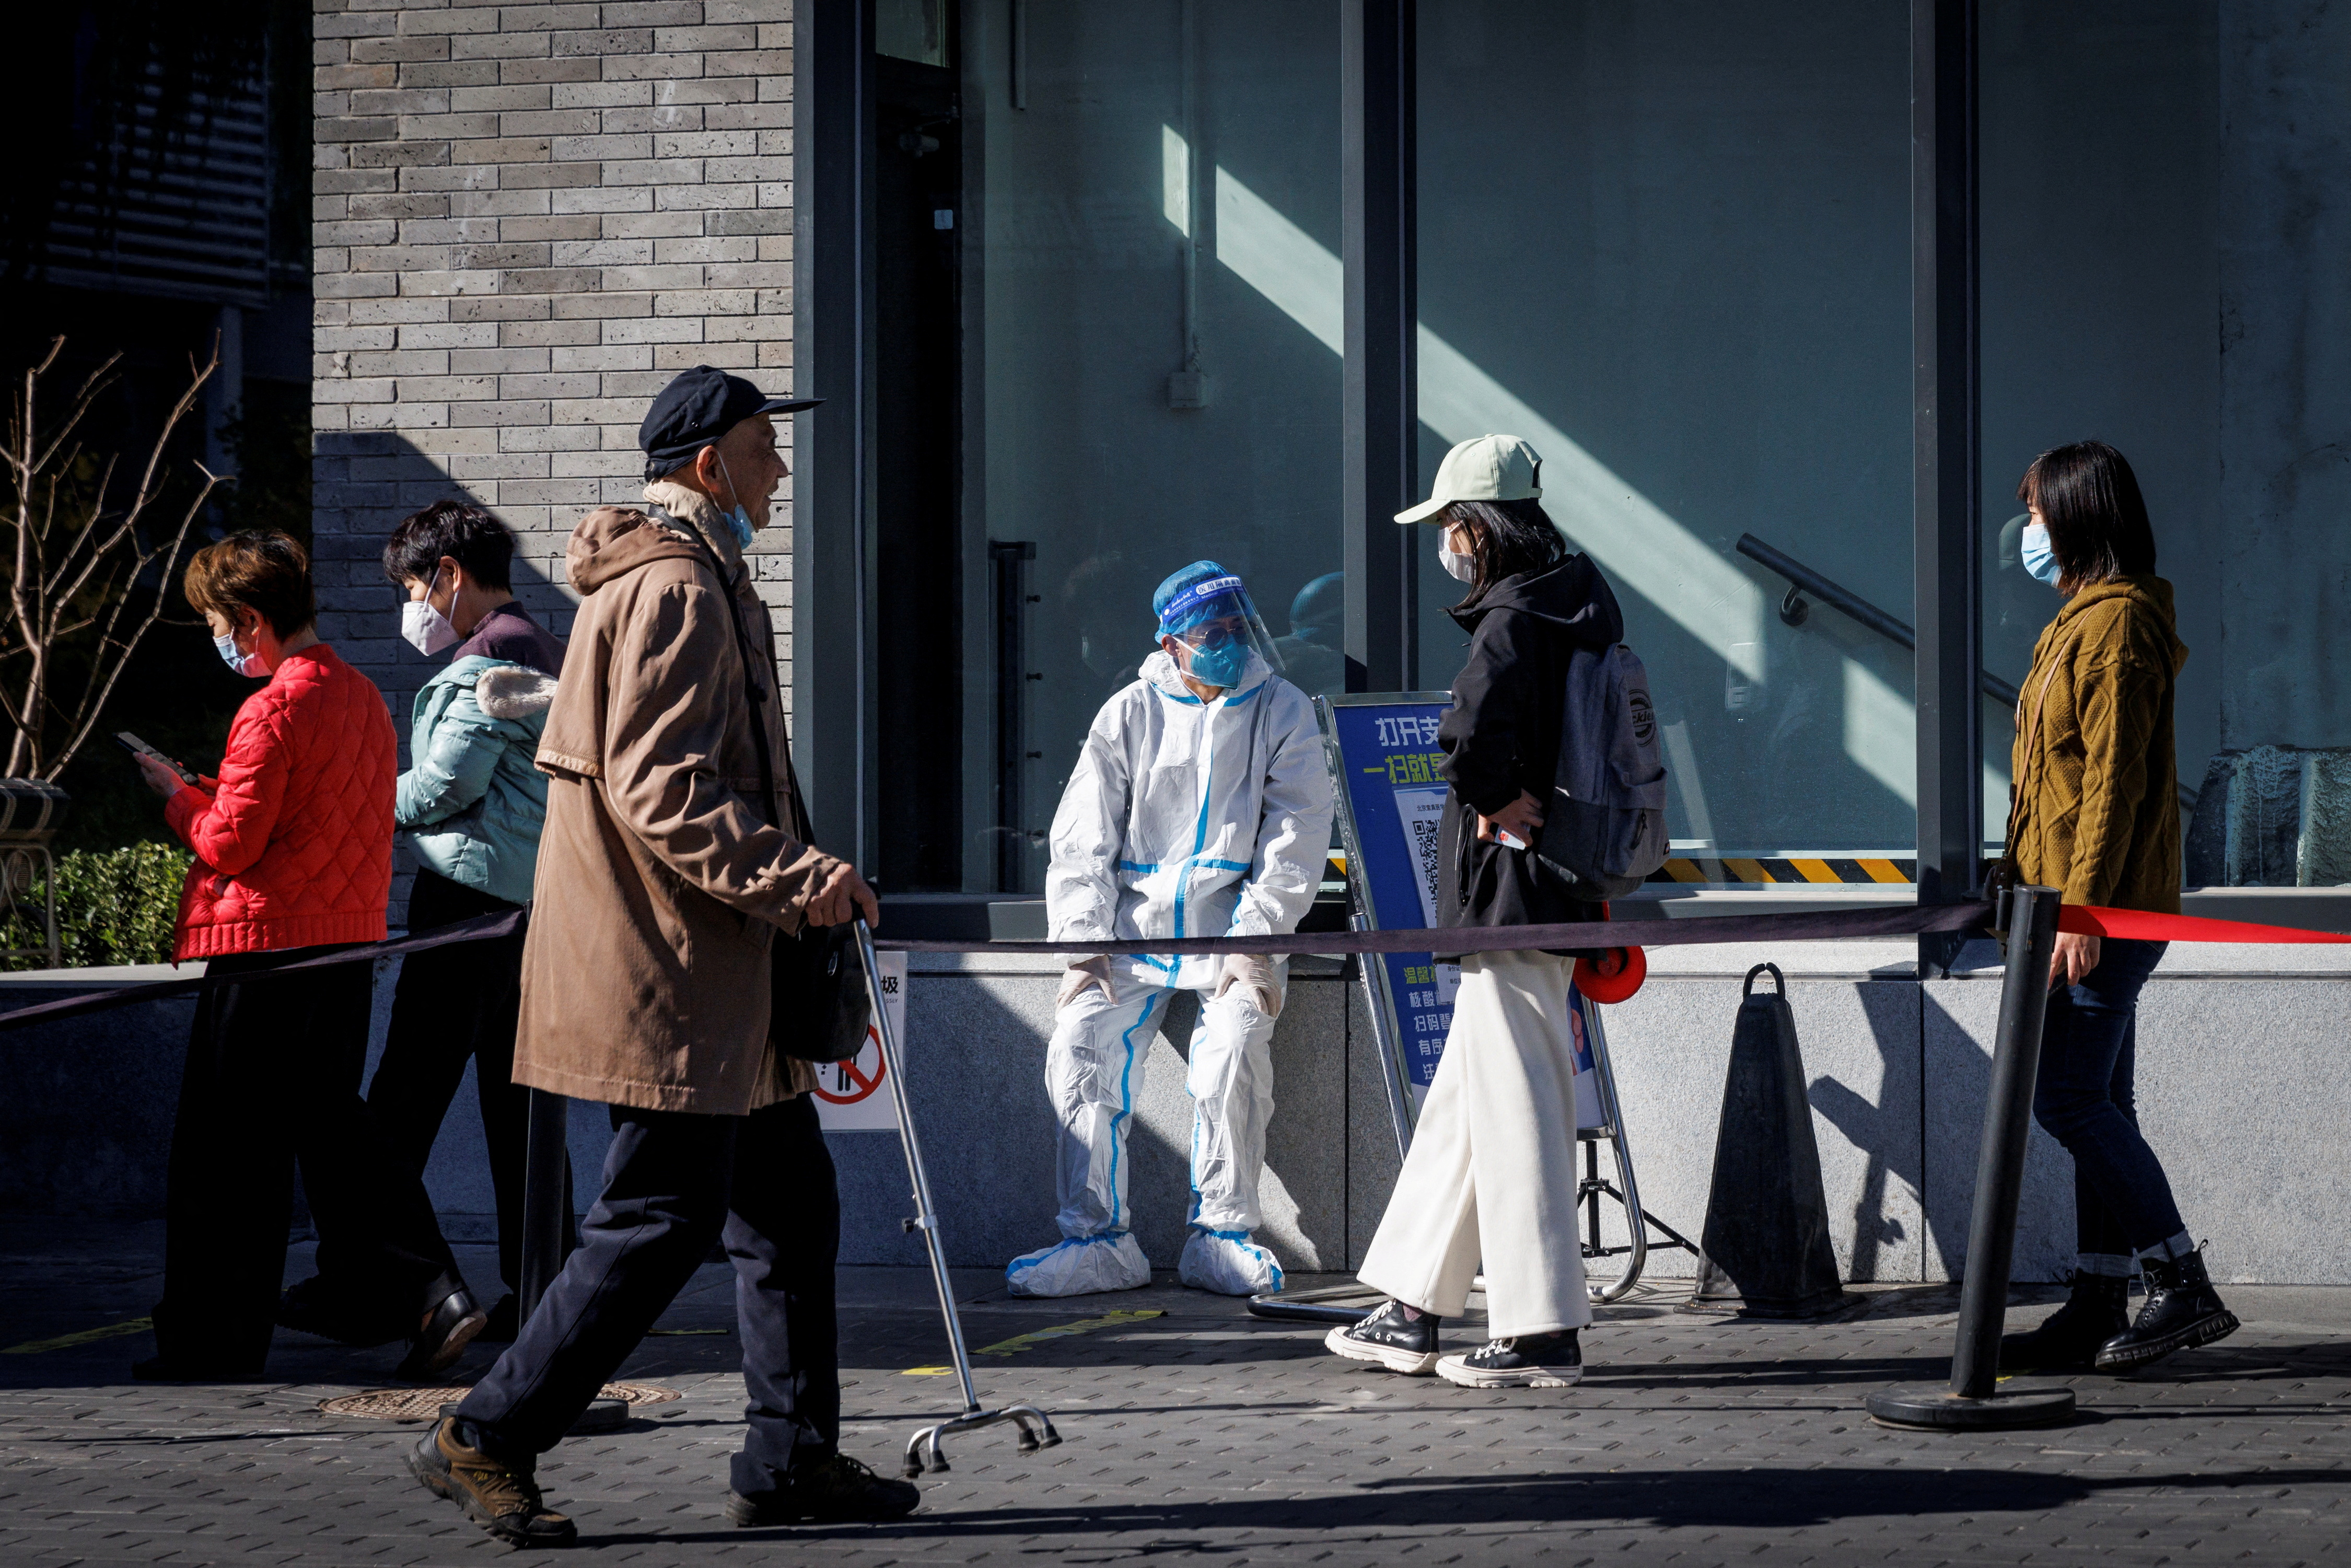 A health worker wears a protective suit near a testing booth as outbreaks of coronavirus disease (COVID-19) continue in Beijing